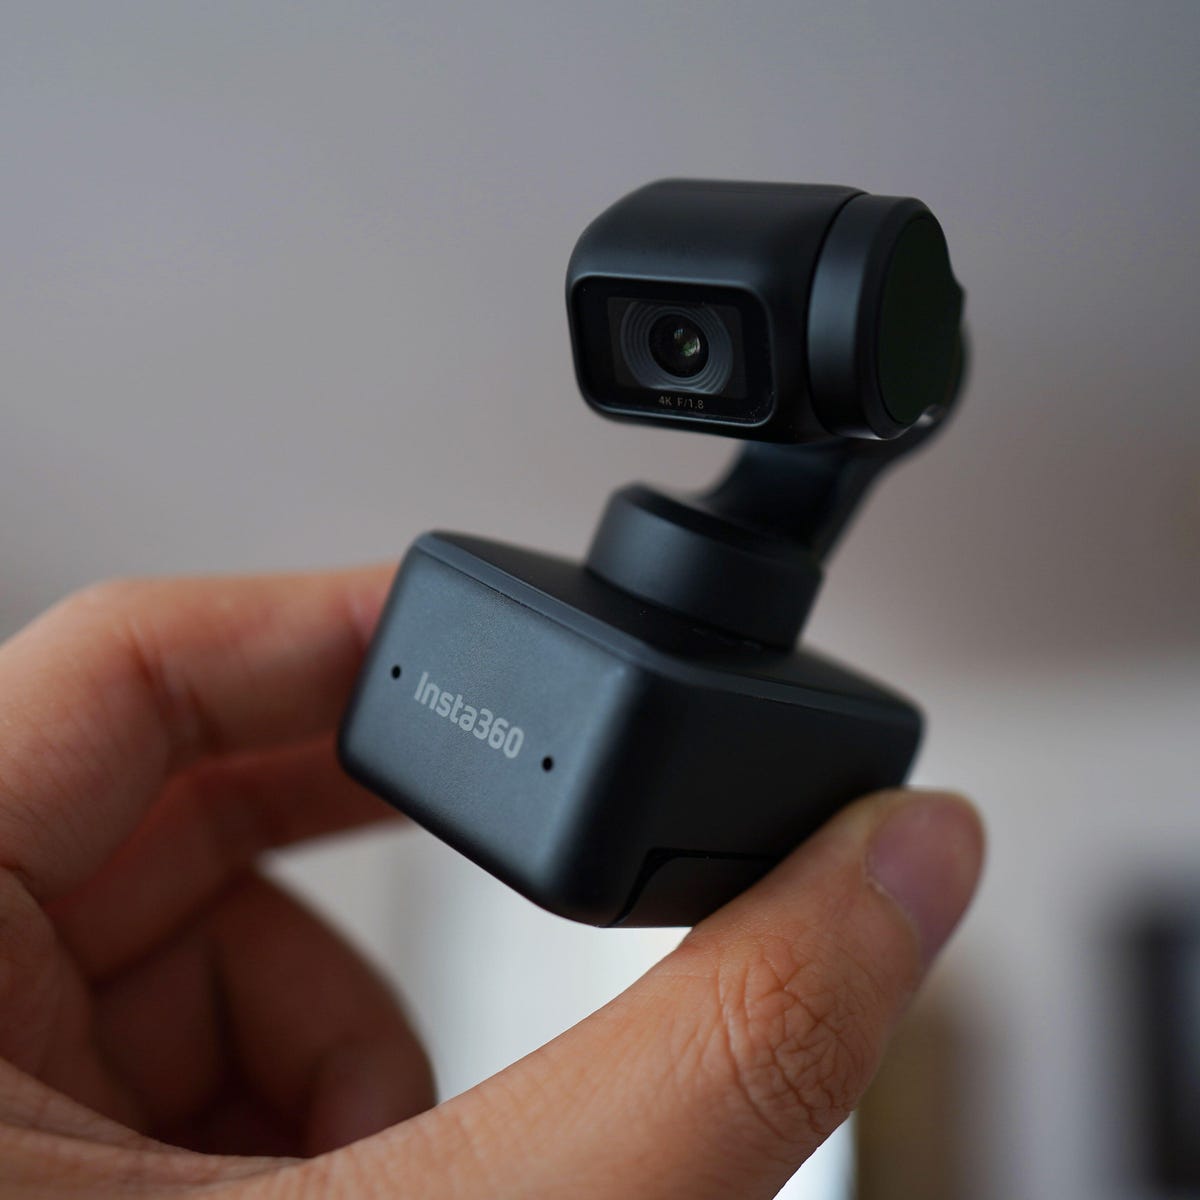 Insta360 Link review: This new 4K webcam means business